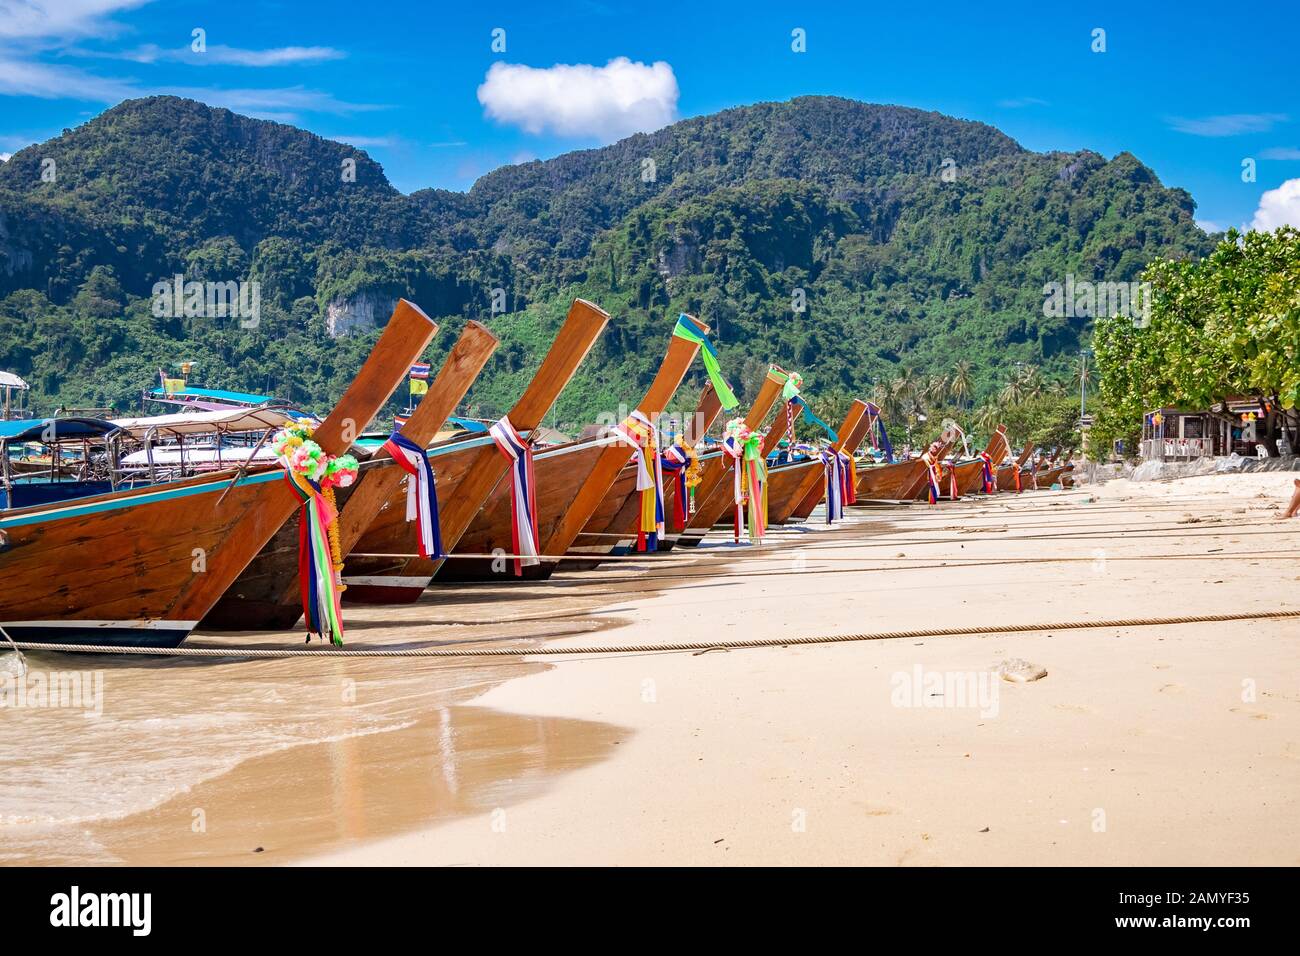 traditional wooden longtail boats parked at a beach in Phi Phi Island. Clear water and clean beach. Stock Photo